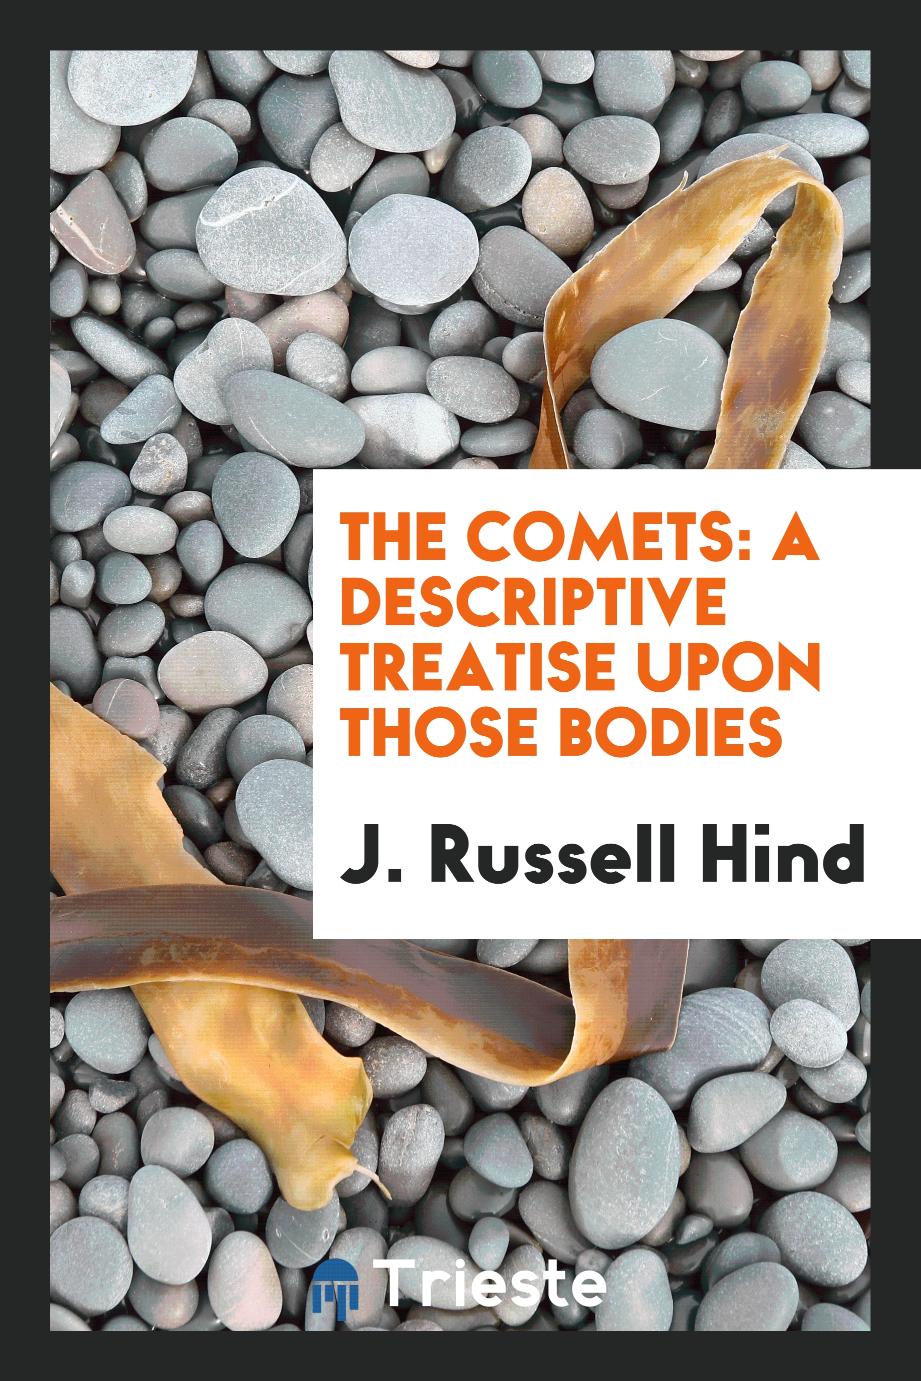 The Comets: a Descriptive Treatise Upon those Bodies